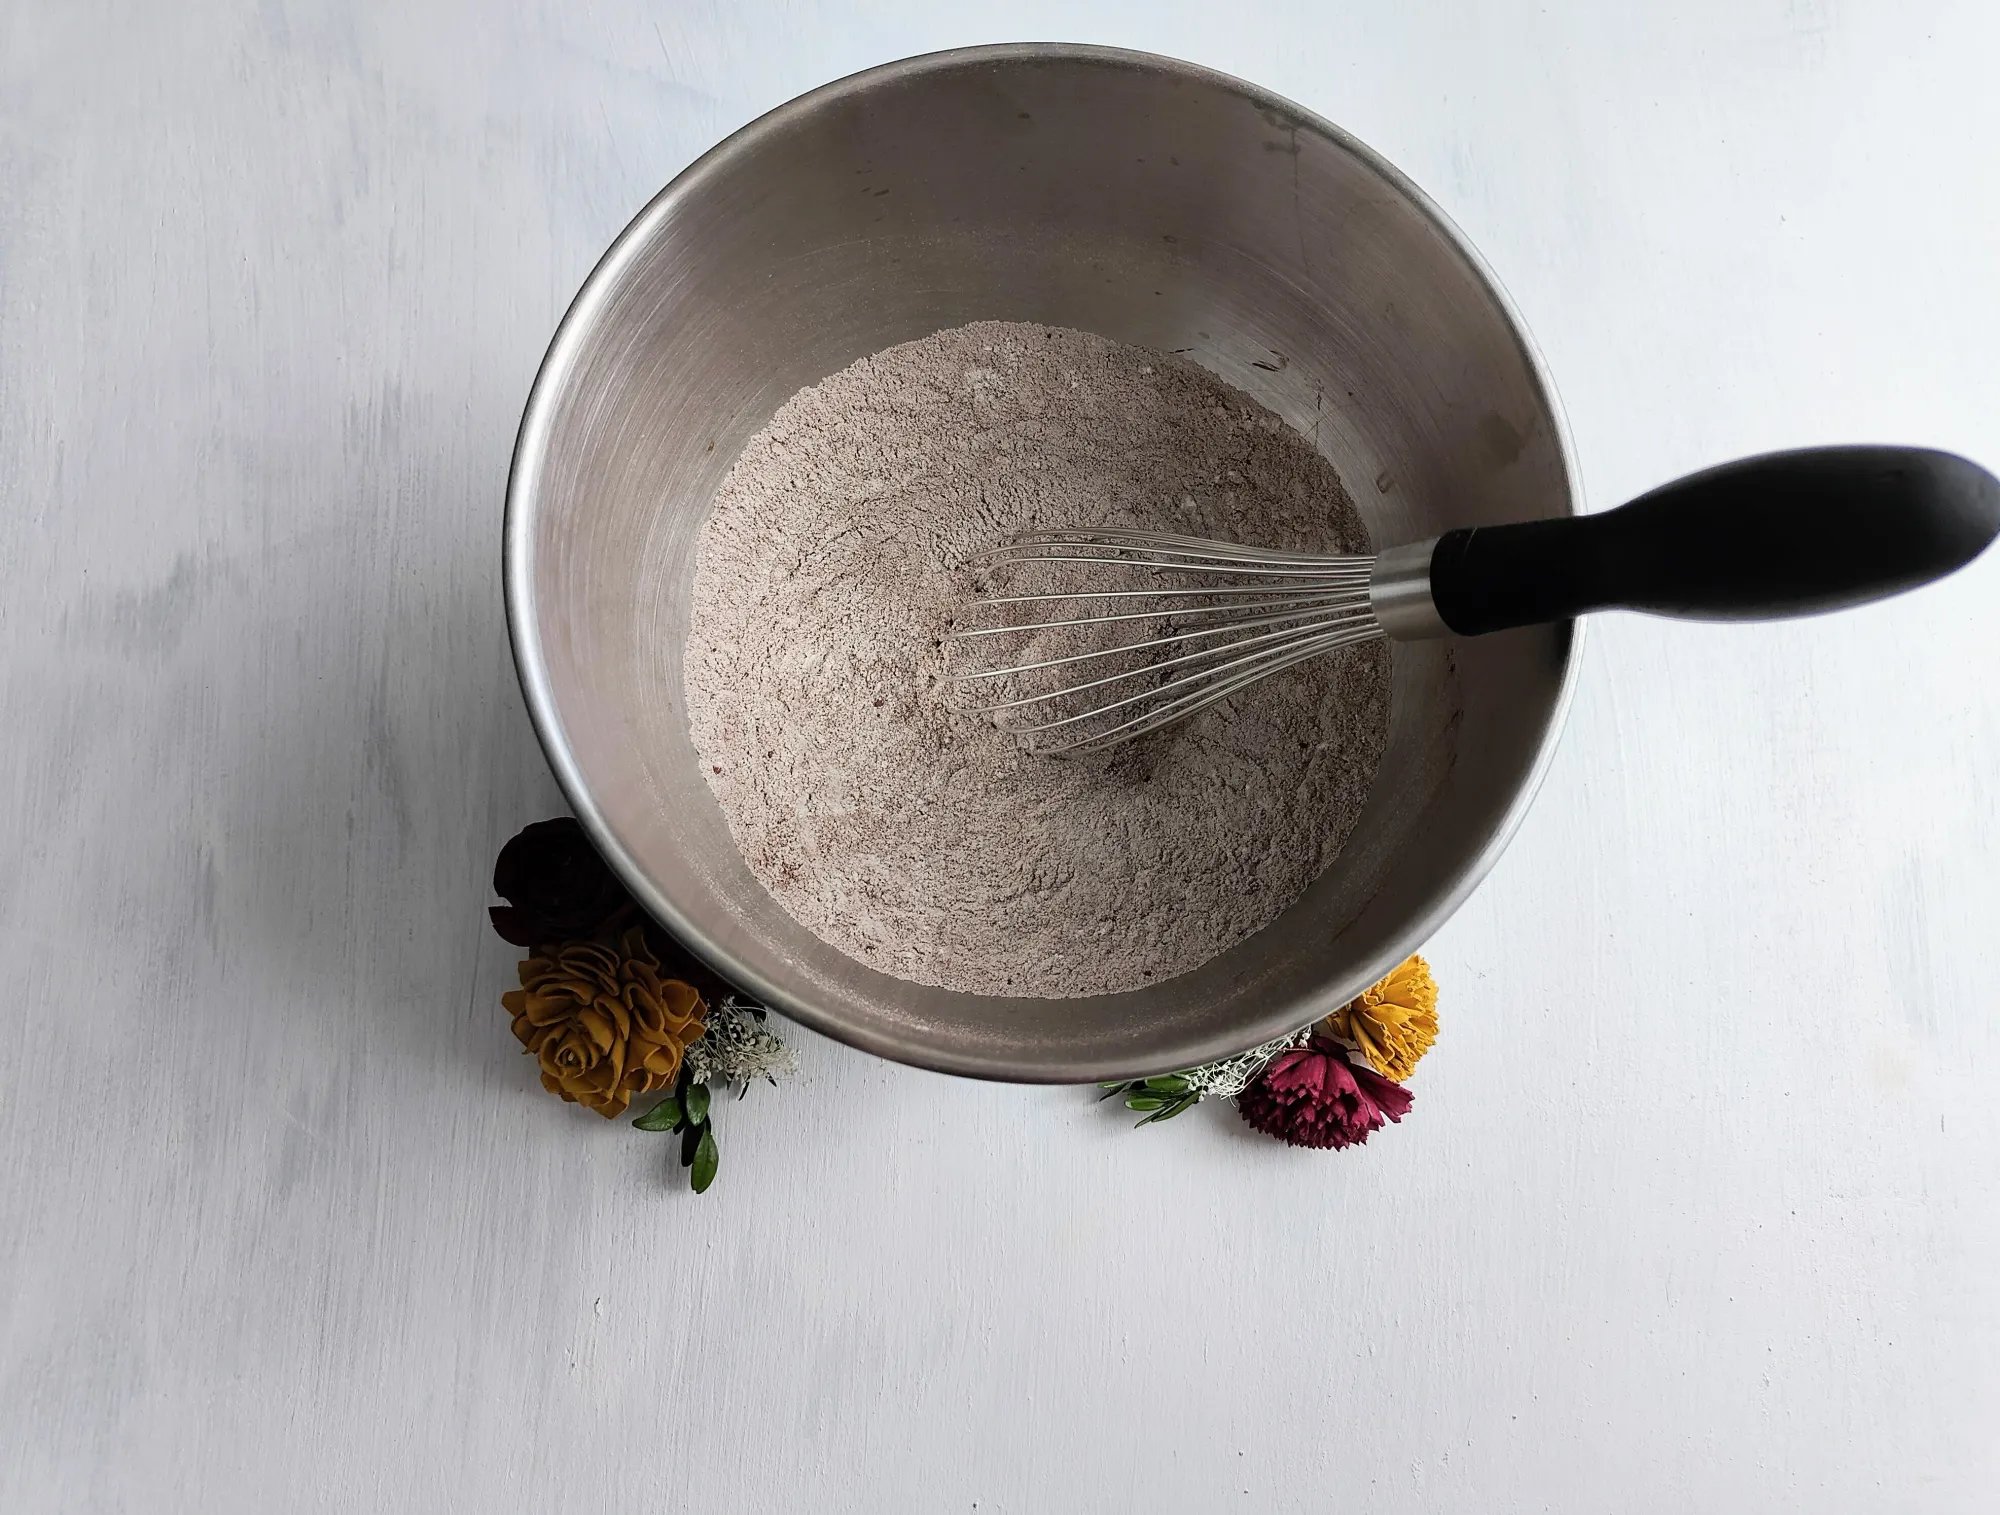 Dry ingredients in a bowl with a whisk